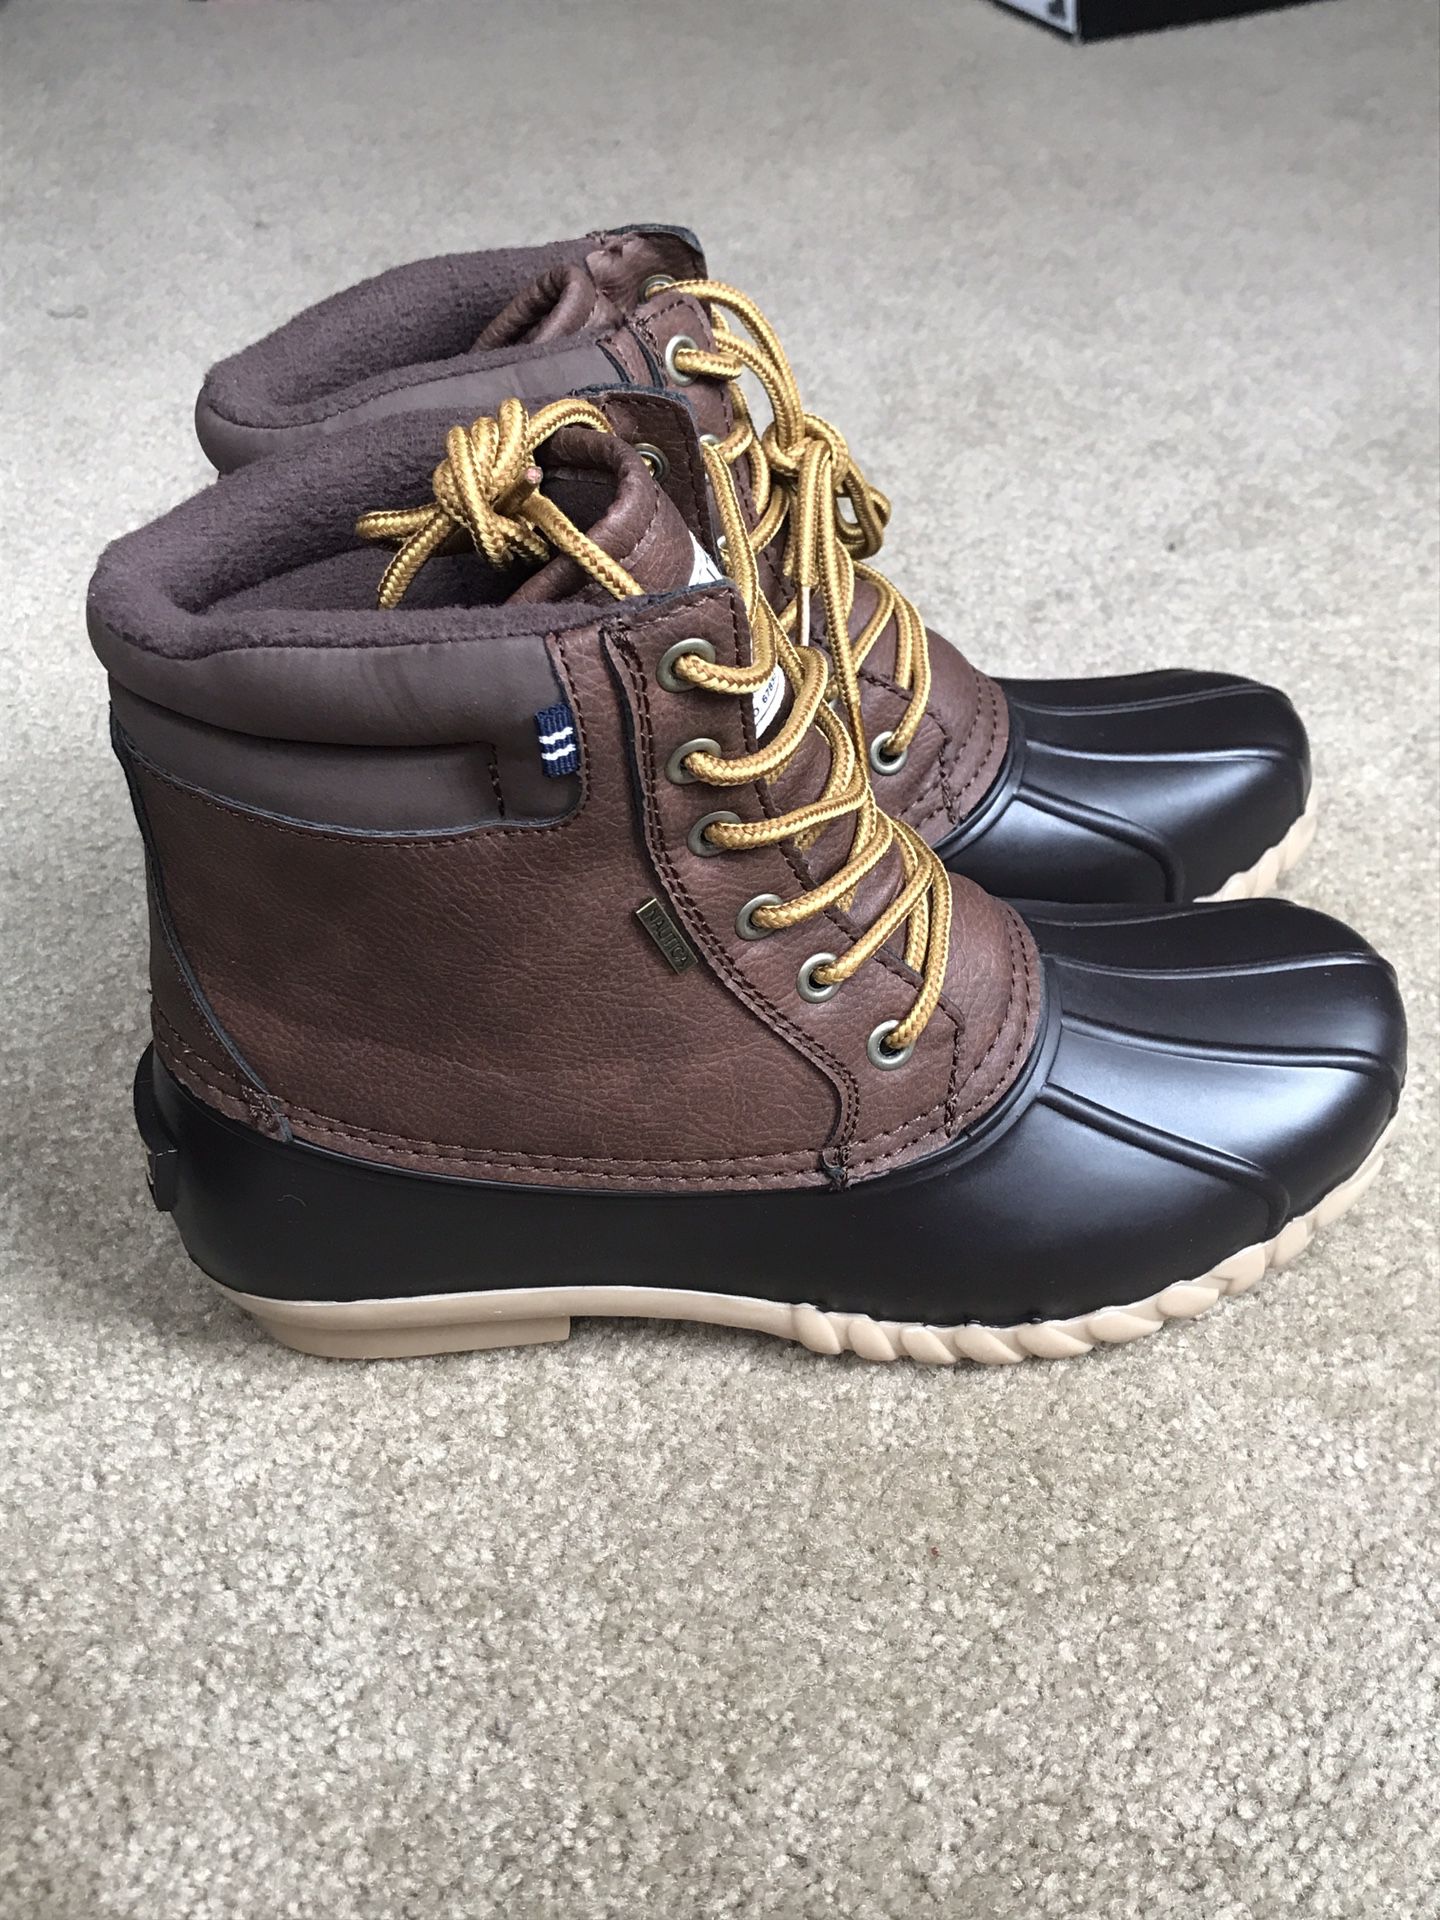 Nautica Mens Duck Boots - Waterproof Shell Insulated Snow Boot - Size 9